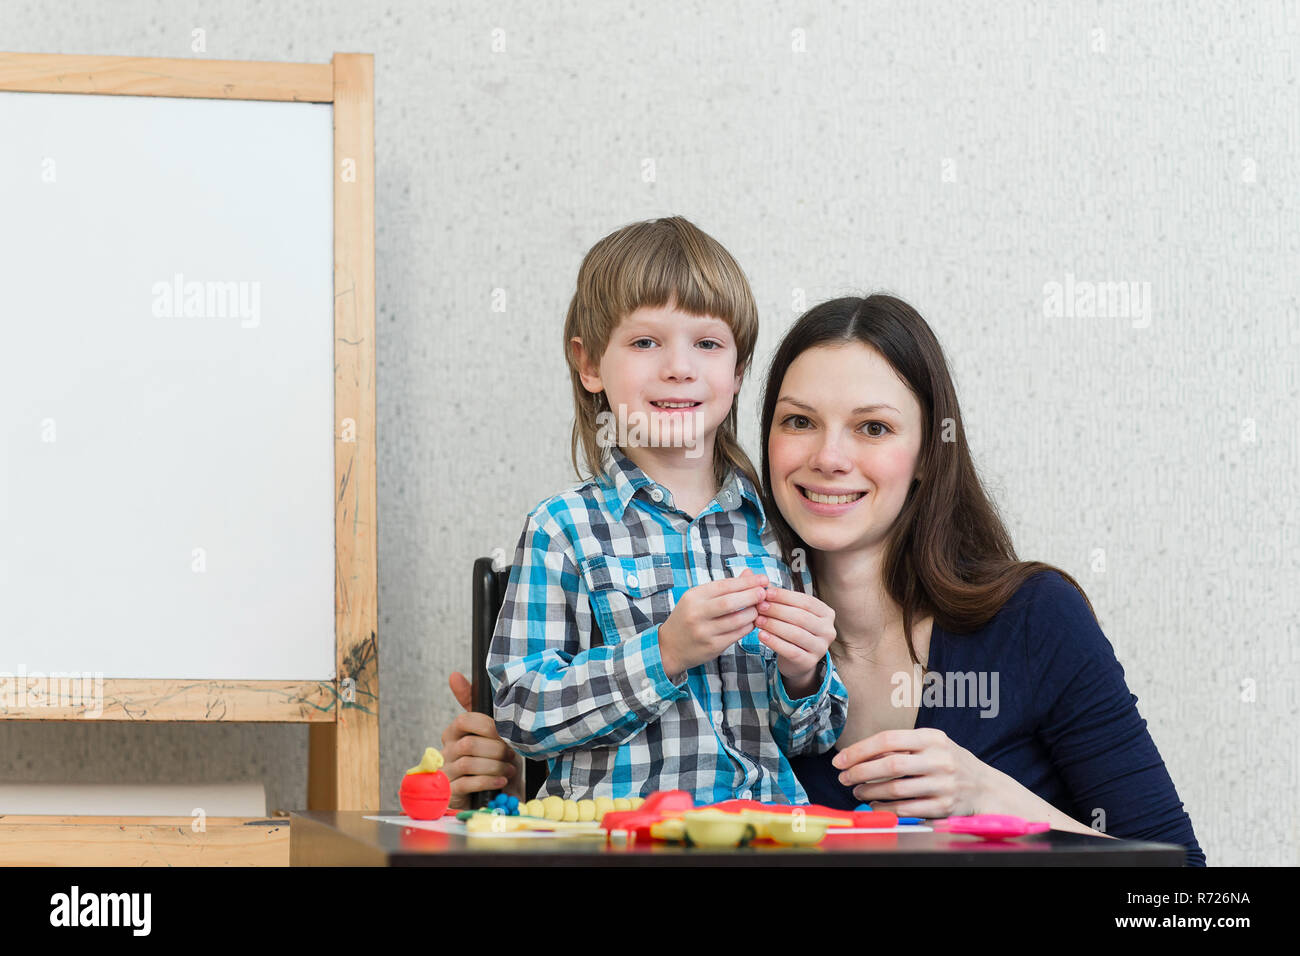 Mother And Son At Home Molded From Clay And Play Together The